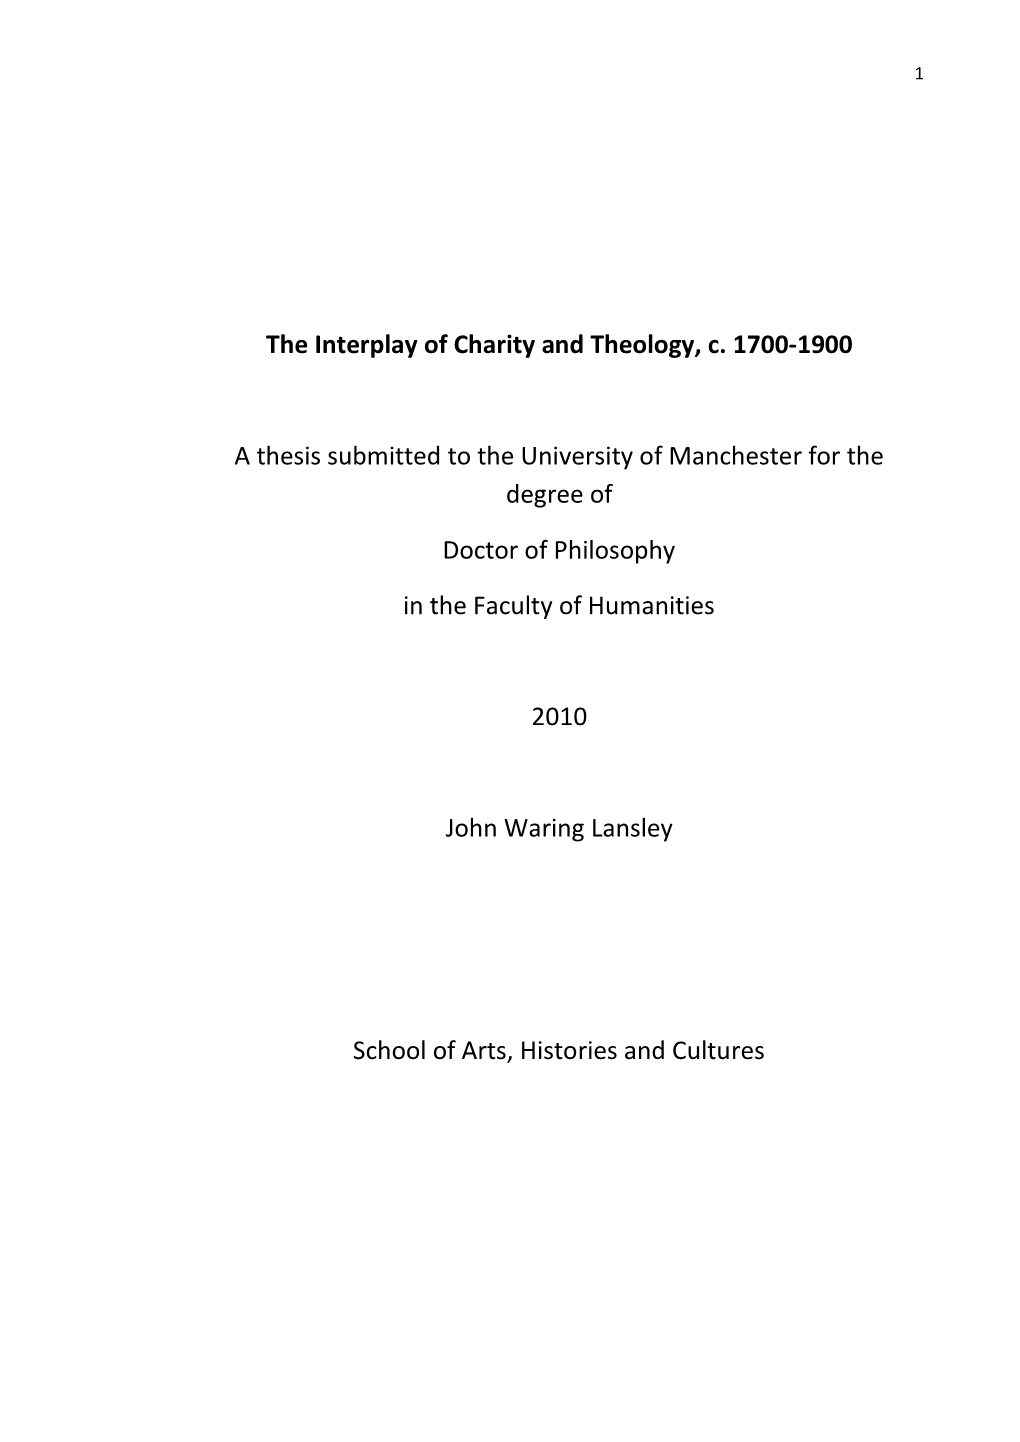 The Interplay of Charity and Theology, C